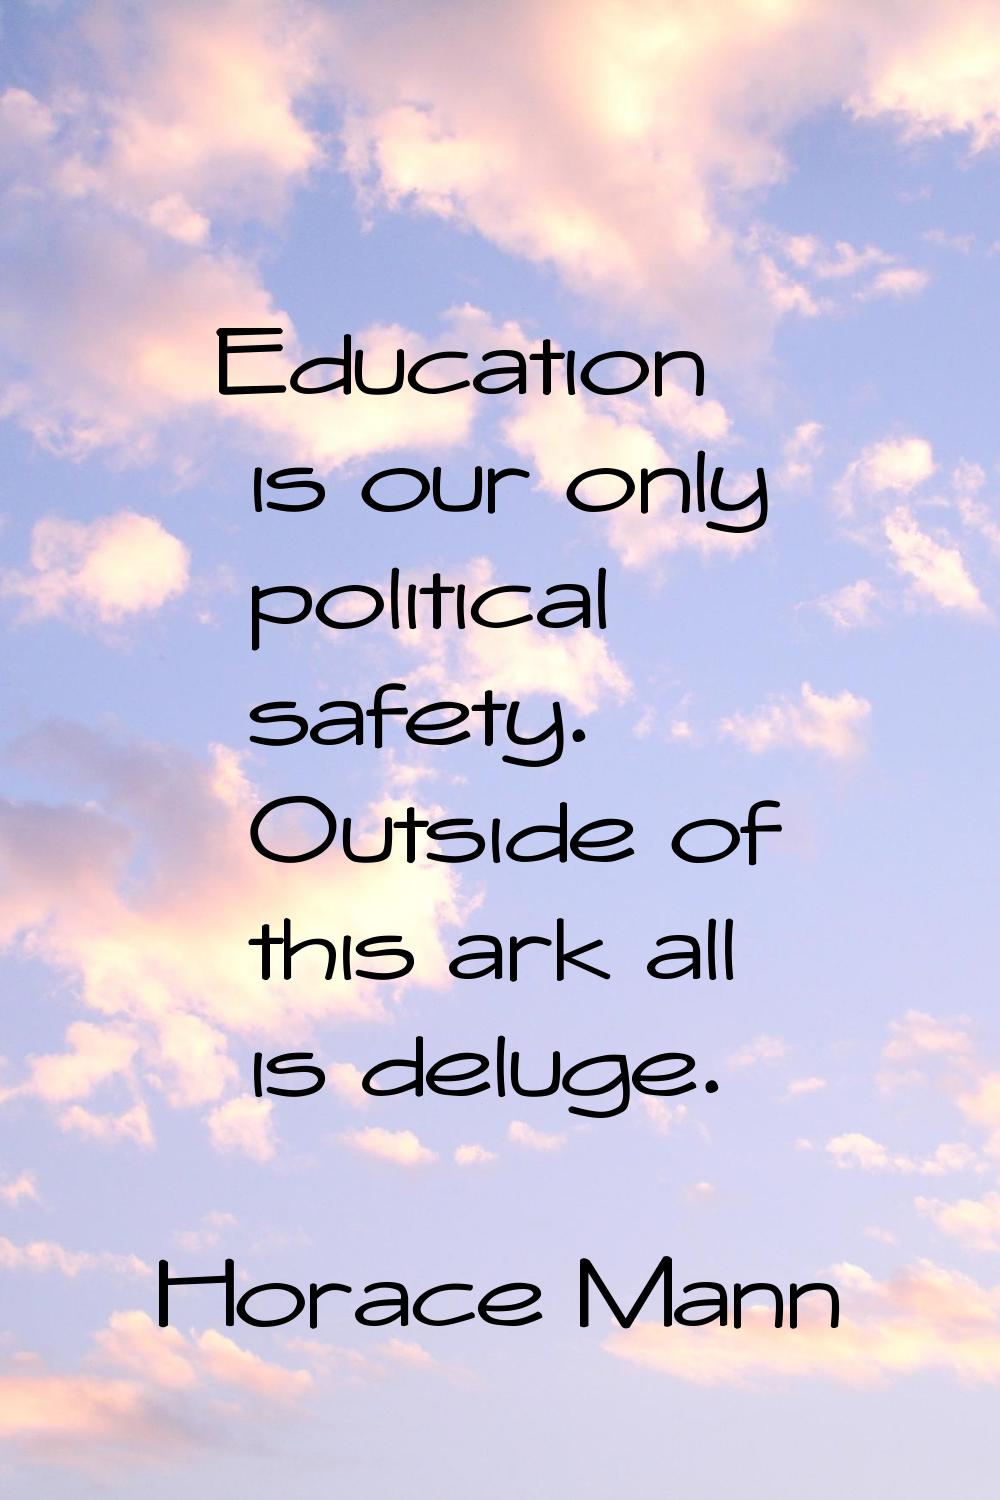 Education is our only political safety. Outside of this ark all is deluge.